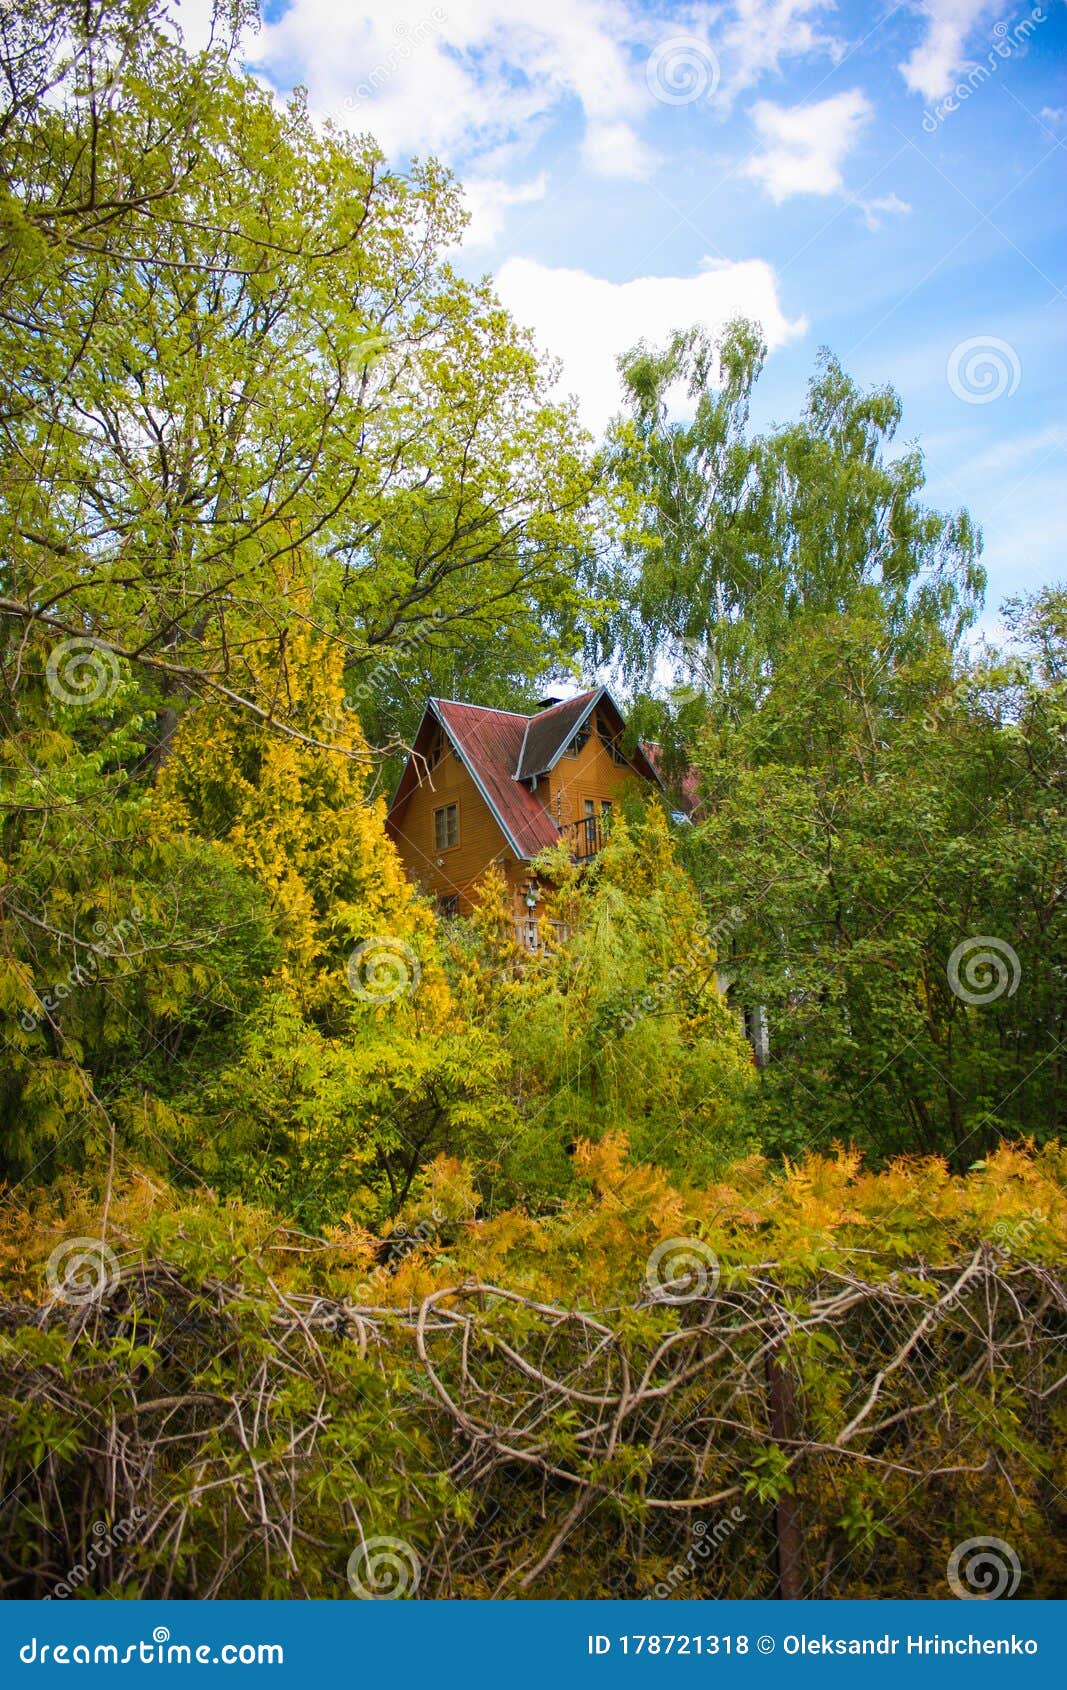 Country House in the Forest Stock Photo - Image of village, landscape ...